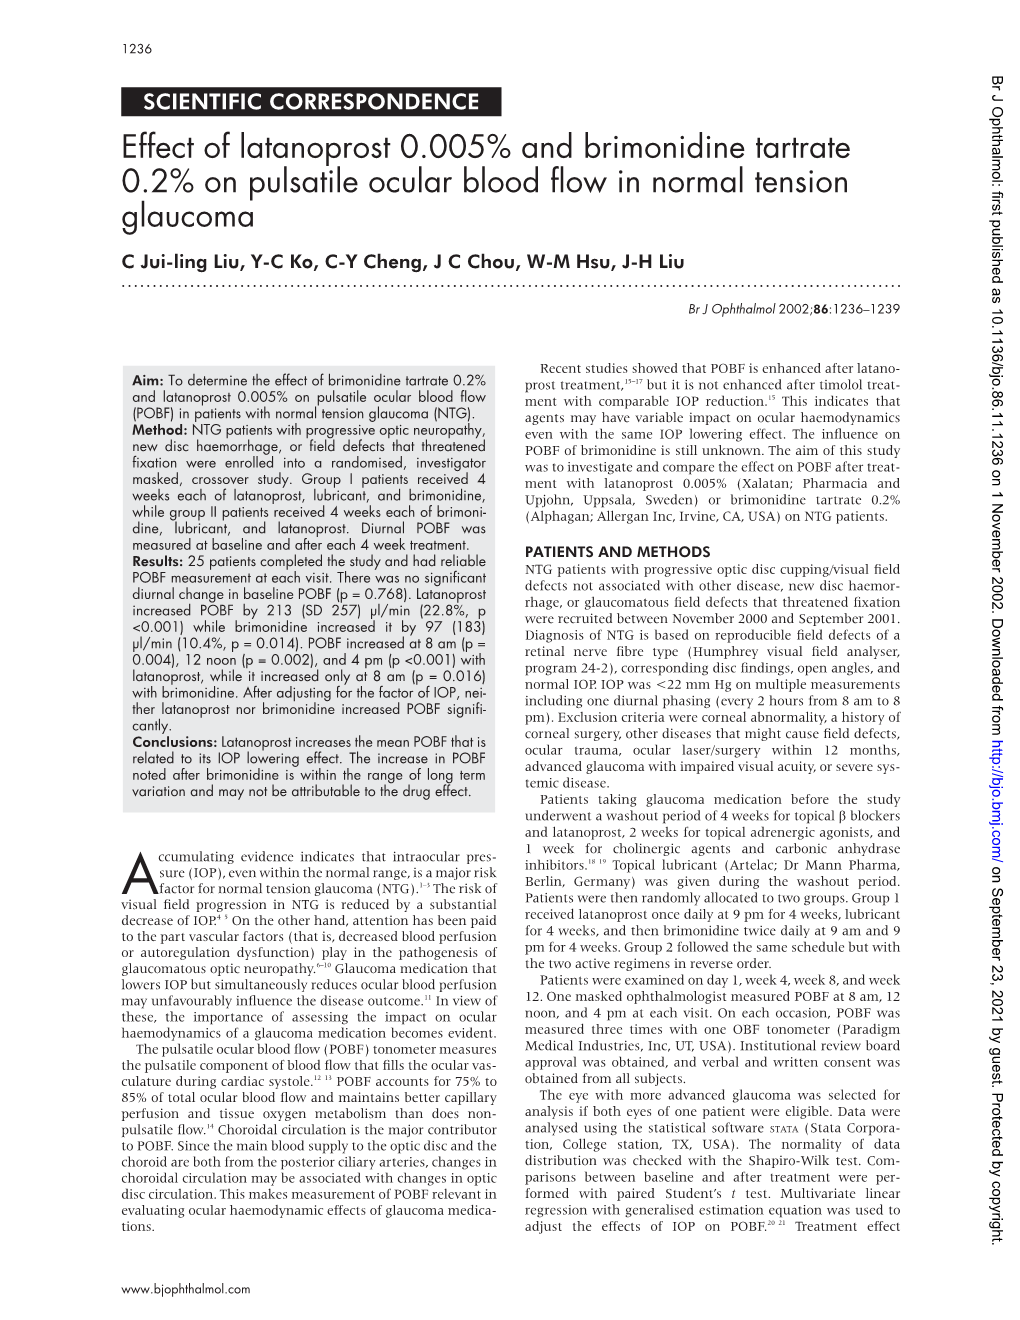 Effect of Latanoprost 0.005% and Brimonidine Tartrate 0.2% on Pulsatile Ocular Blood Flow in Normal Tension Glaucoma